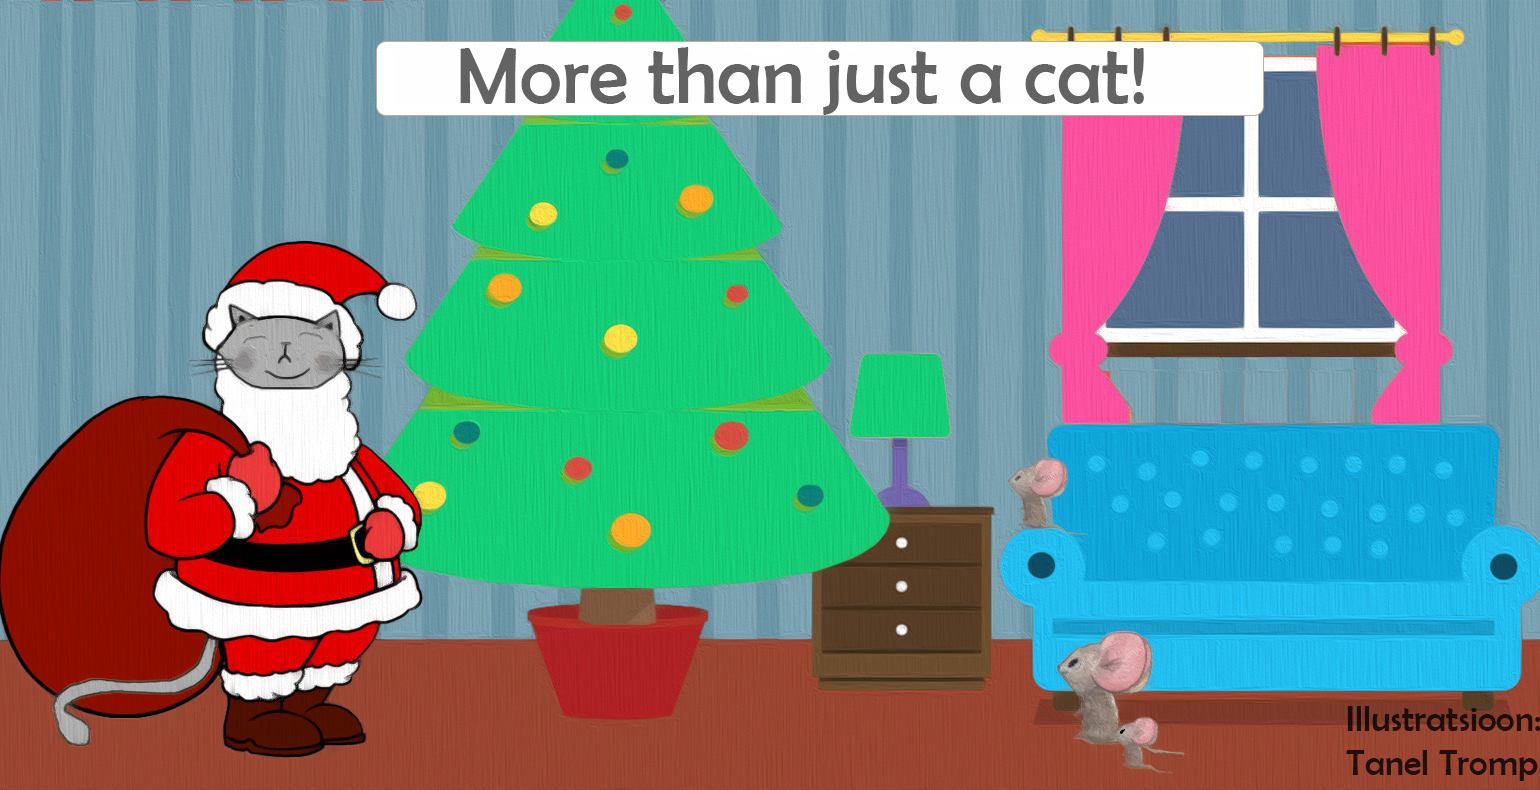 Cat wearing a santa Claus outfit, a cat is more than just a cat.